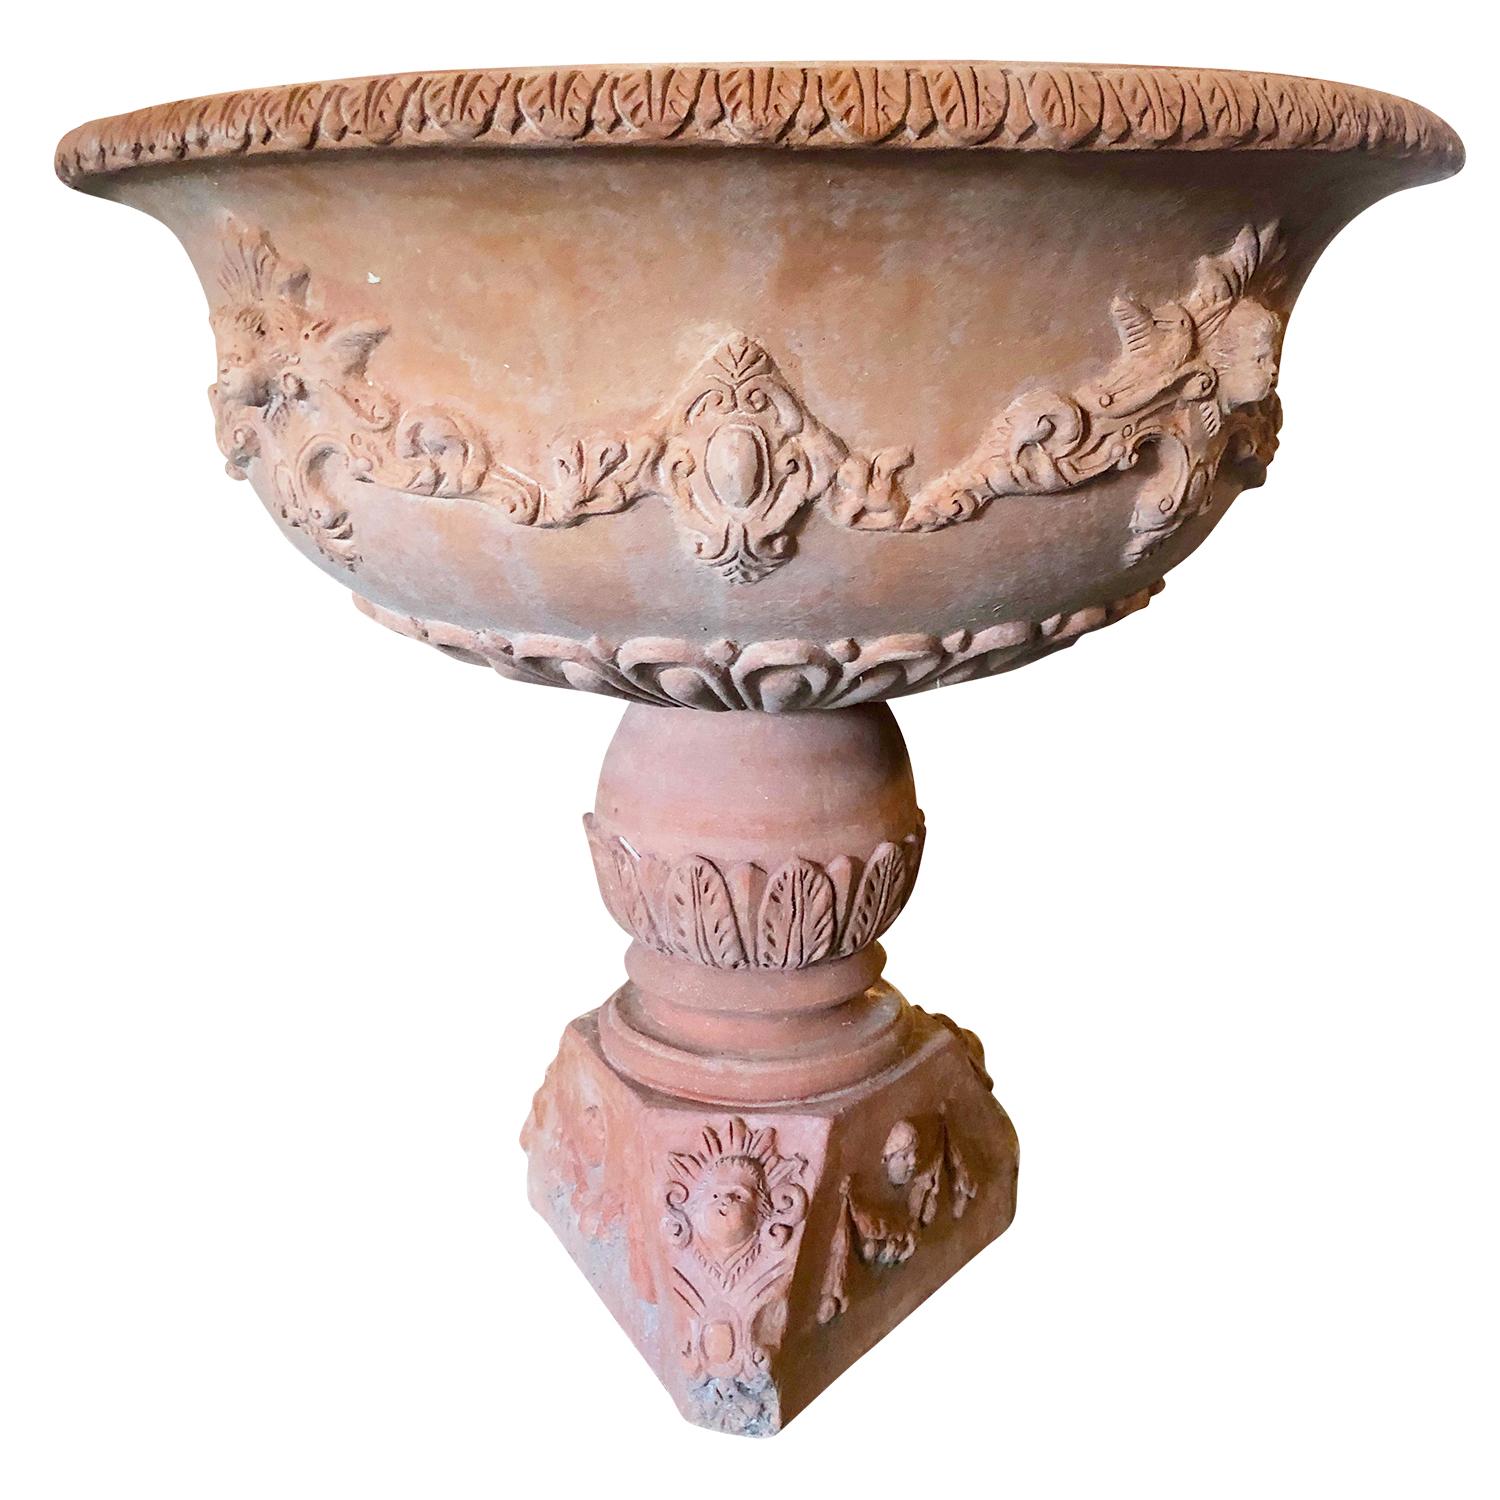 This Tuscan round terra cotta planter is full of extremely intricate details and mounted onto a hand-carved limestone base. This typical Renaissance-style urn includes shields, masks, and stags. This terra cotta garden planter from Naples, Italy can